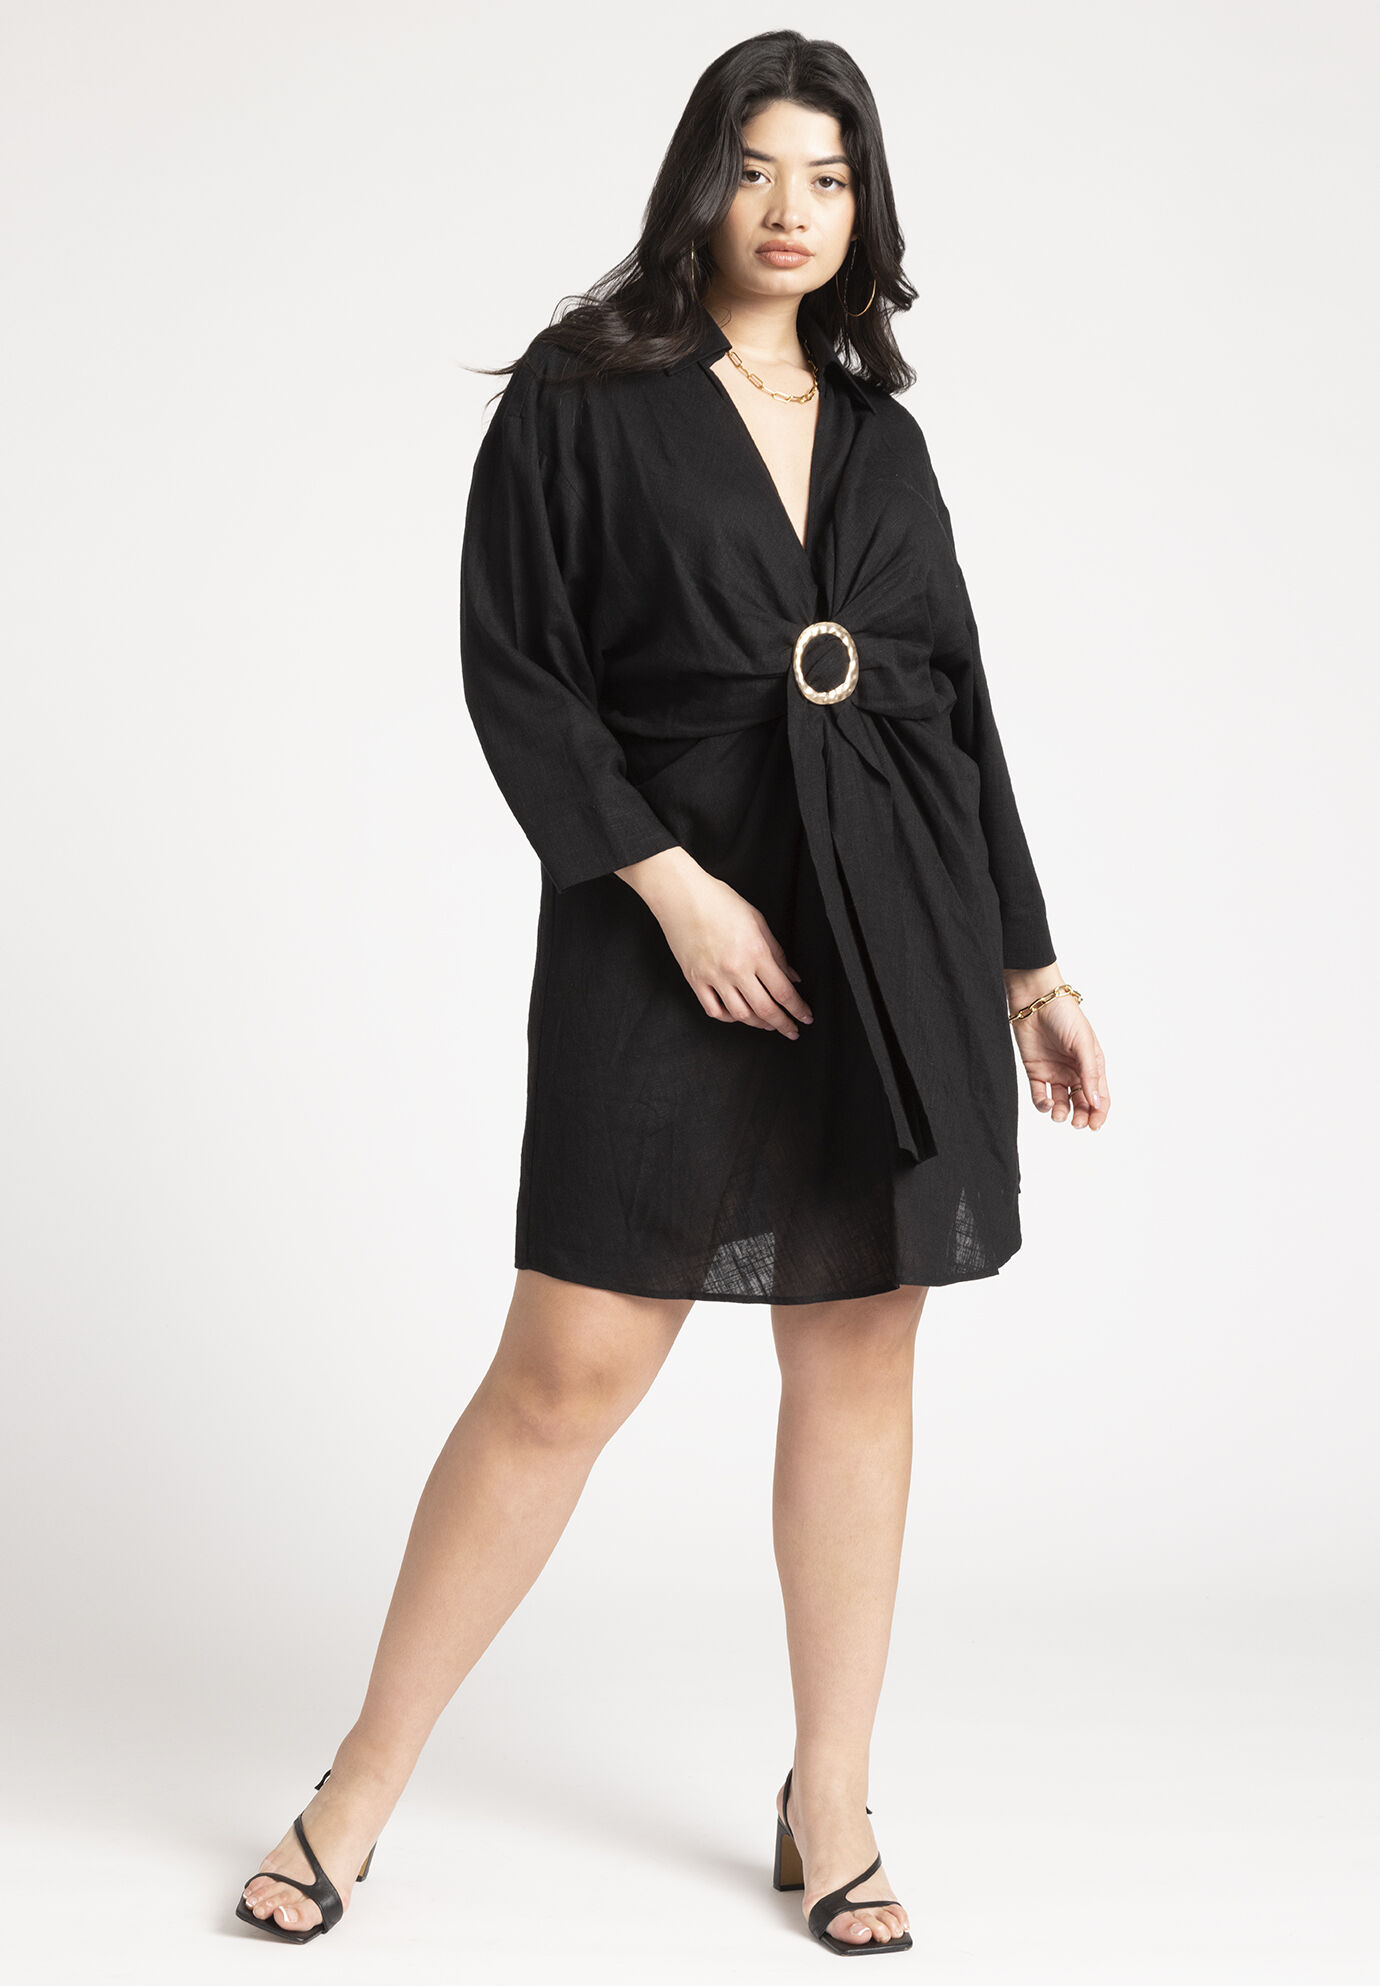 Plus Size Collared Short Dolman Long Sleeves Cover Up/Tunic